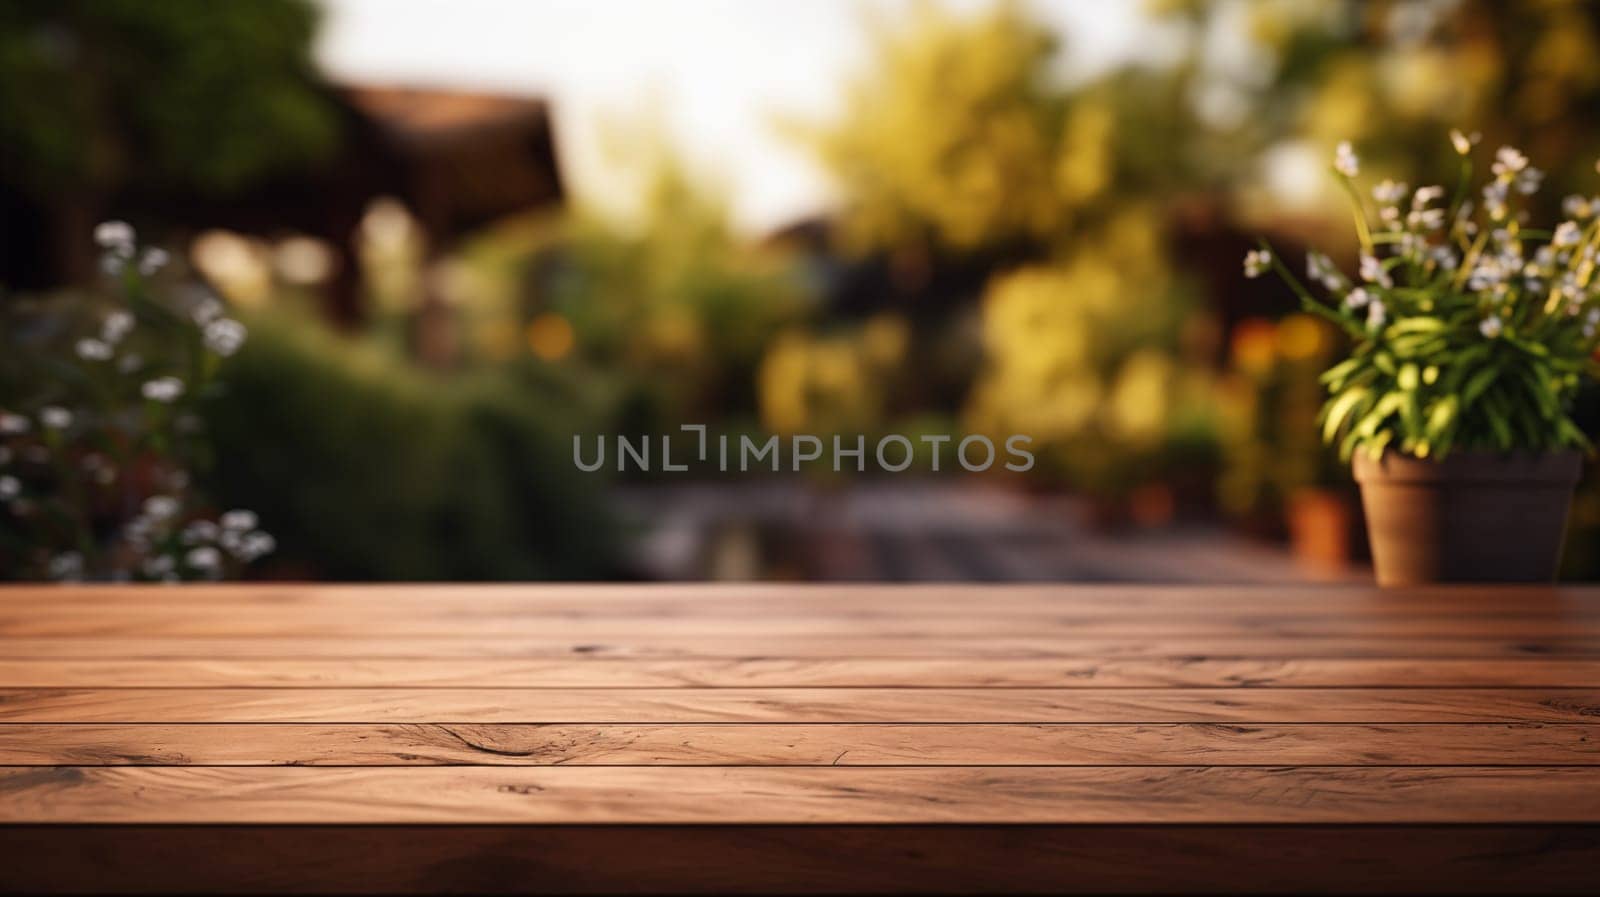 Warm wooden surface with a soft-focus garden and potted plants in the background by Zakharova